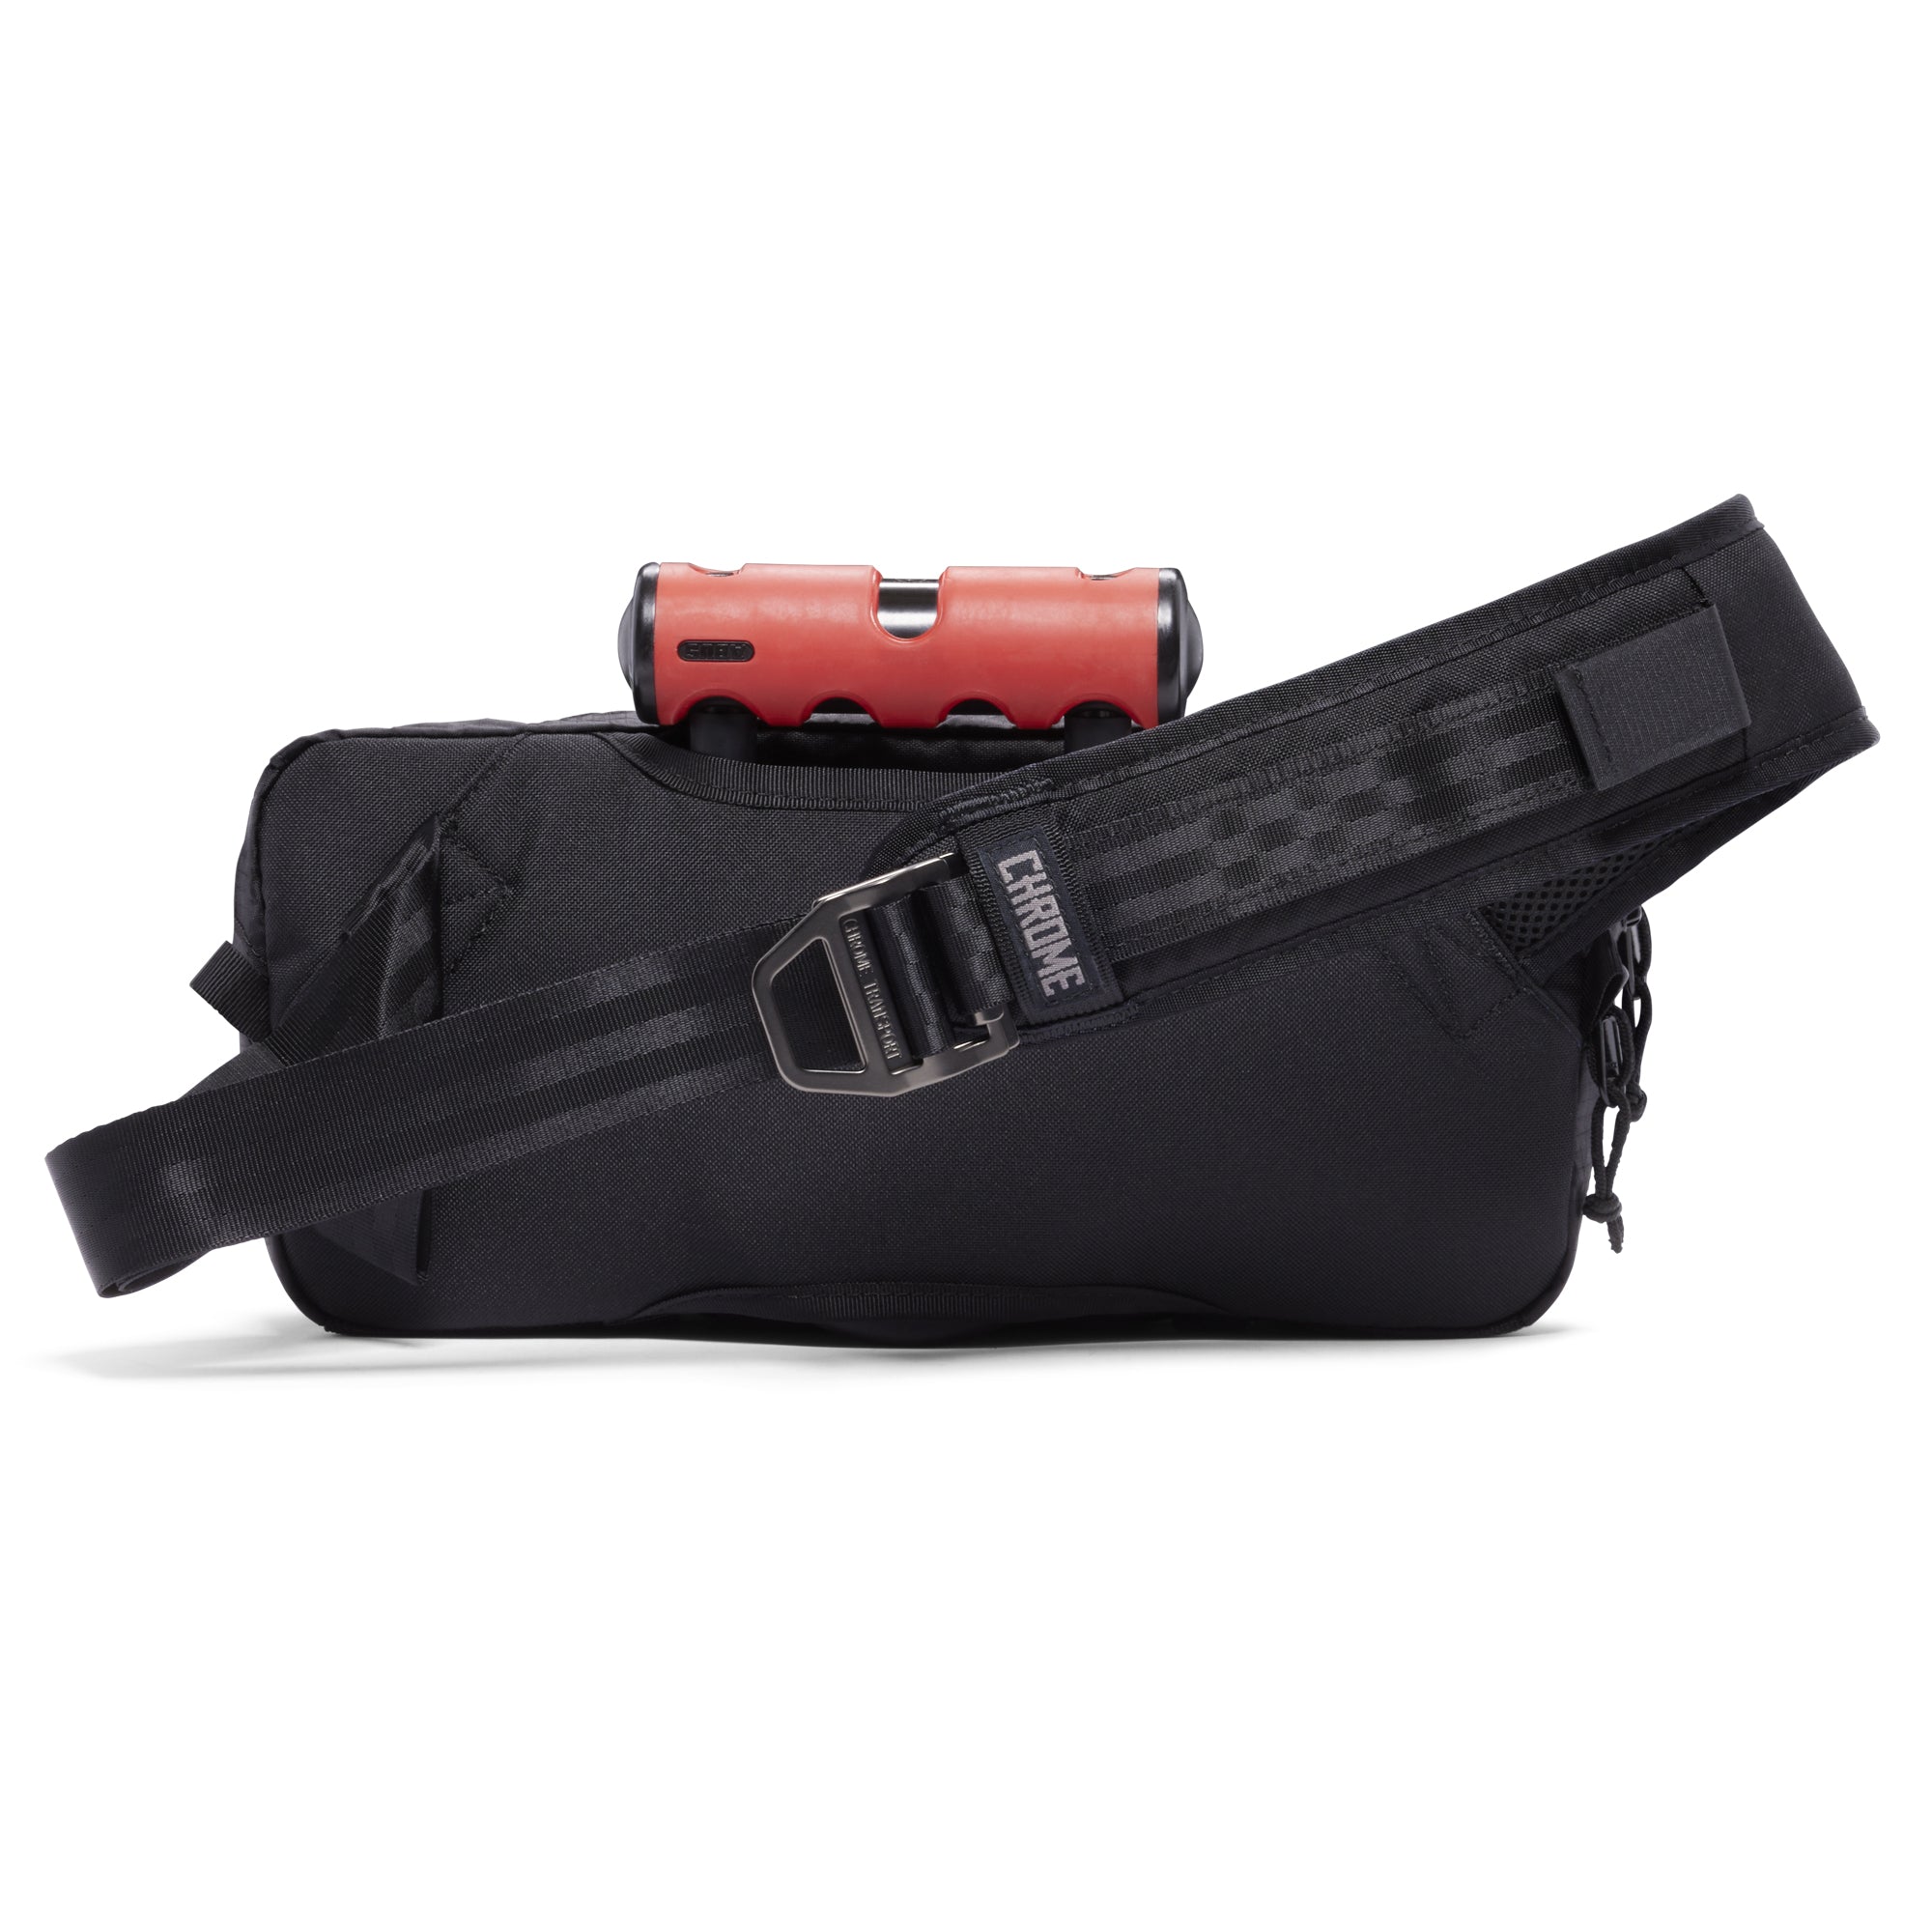 Kadet Sling LTD in Black X with swappable buckle technology back of the bag